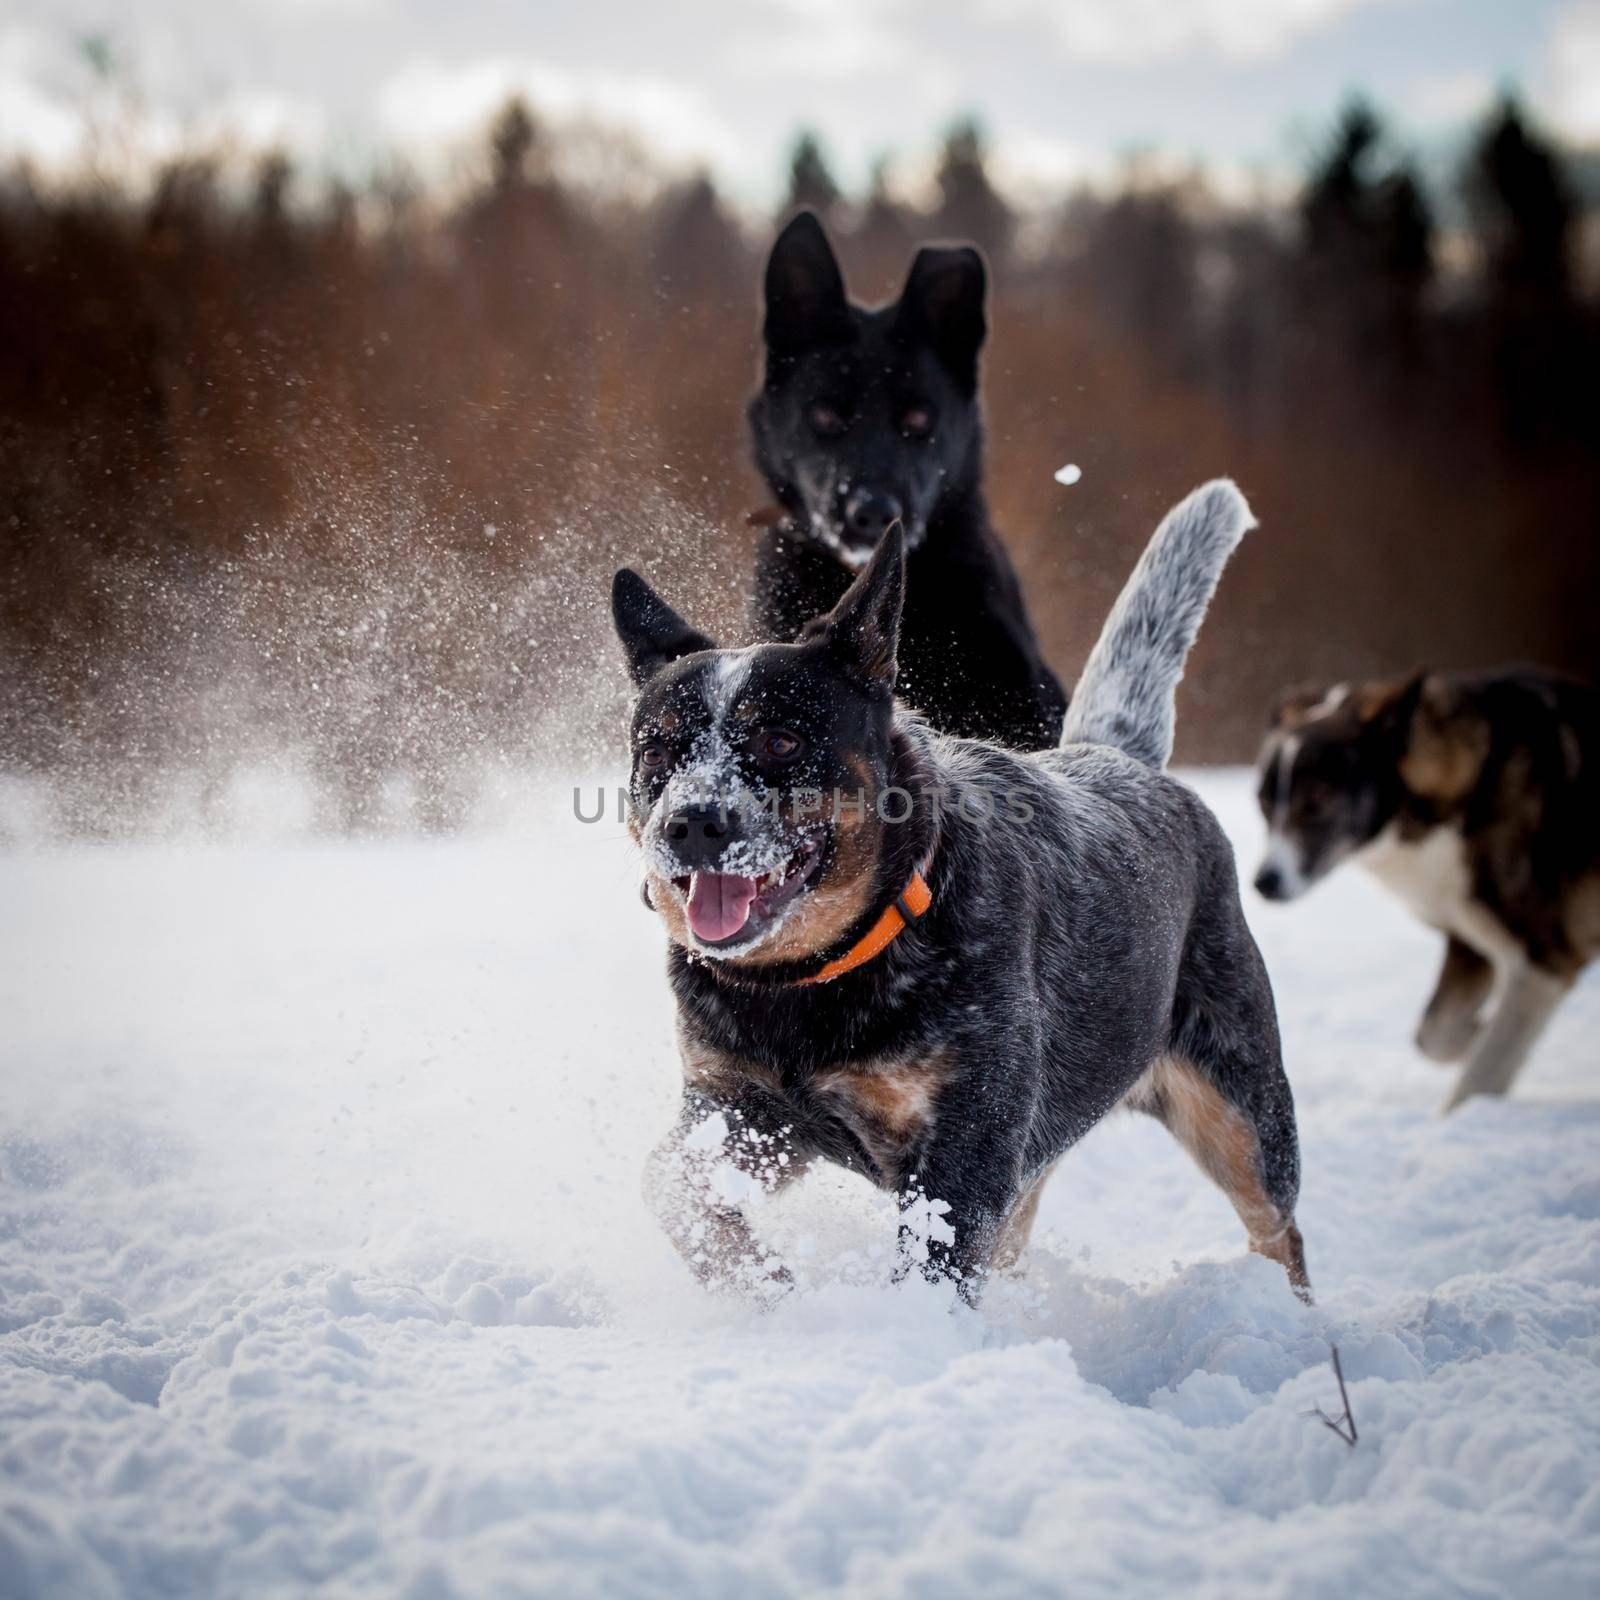 Australian Cattle Dog with east-european shepherd dog playing on the winter field